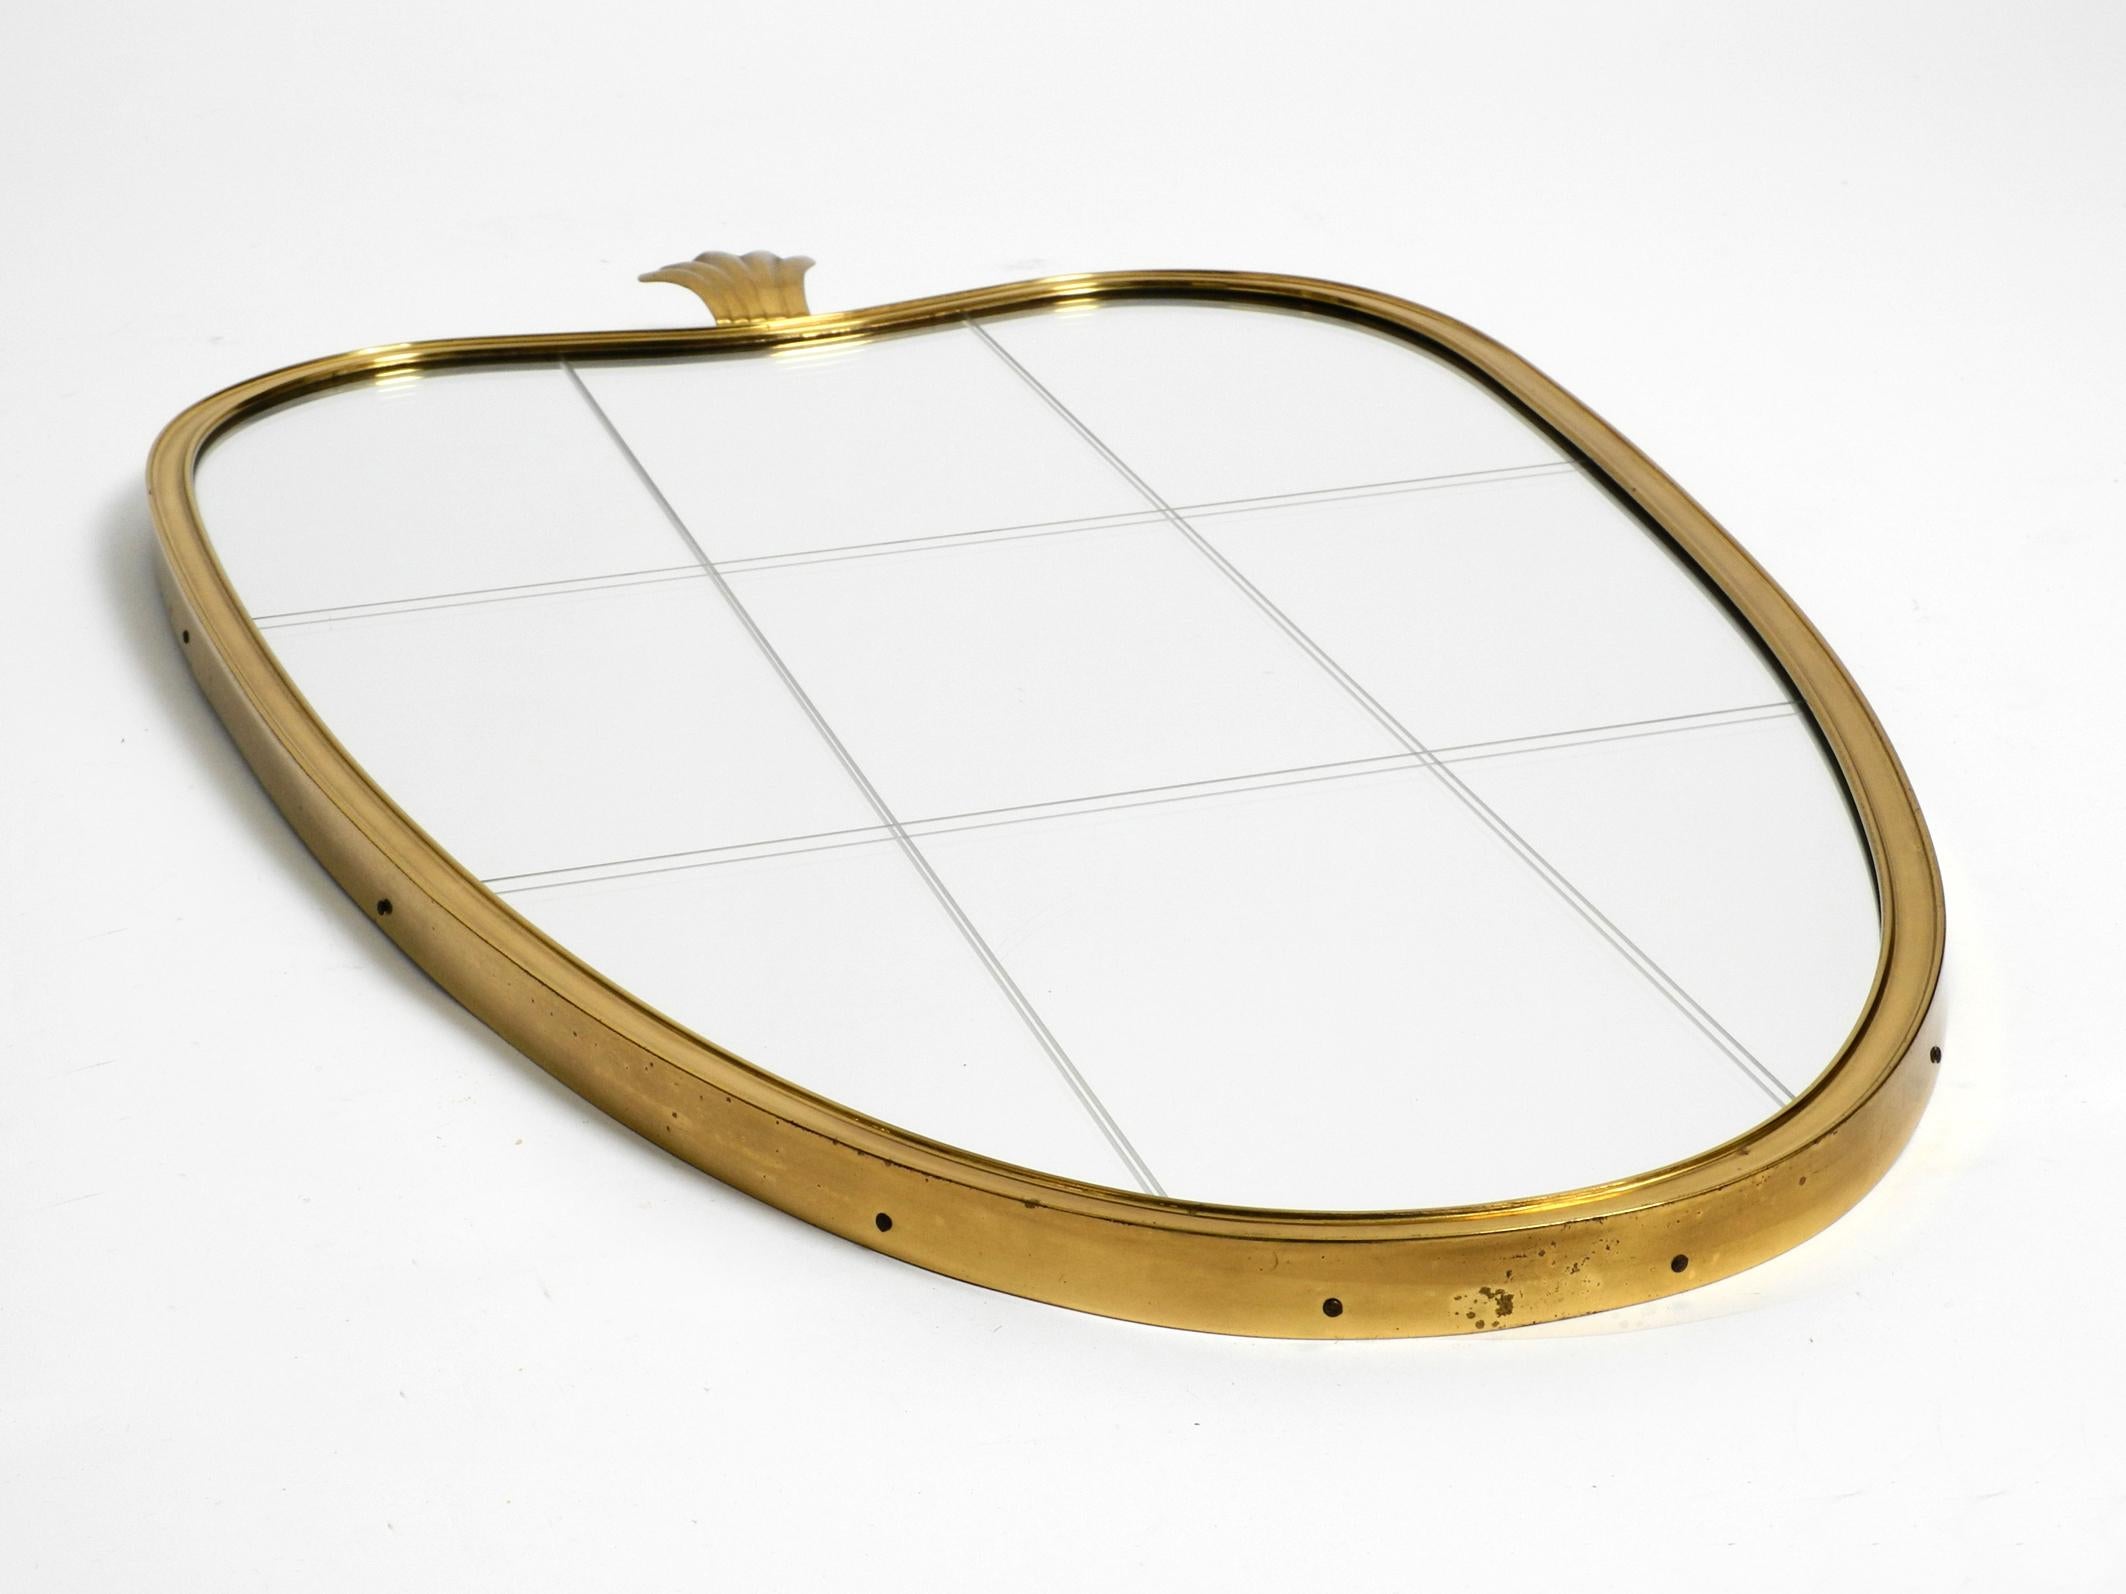 Beautiful heavy Mid Century Modern brass wall mirror.
Manufacturer is Münchner Zierspiegel. Made in Germany.
Great minimalist design. Beautiful patina on the brass.
The mirror glass is still original with the typical mill-cut from that time.
It was